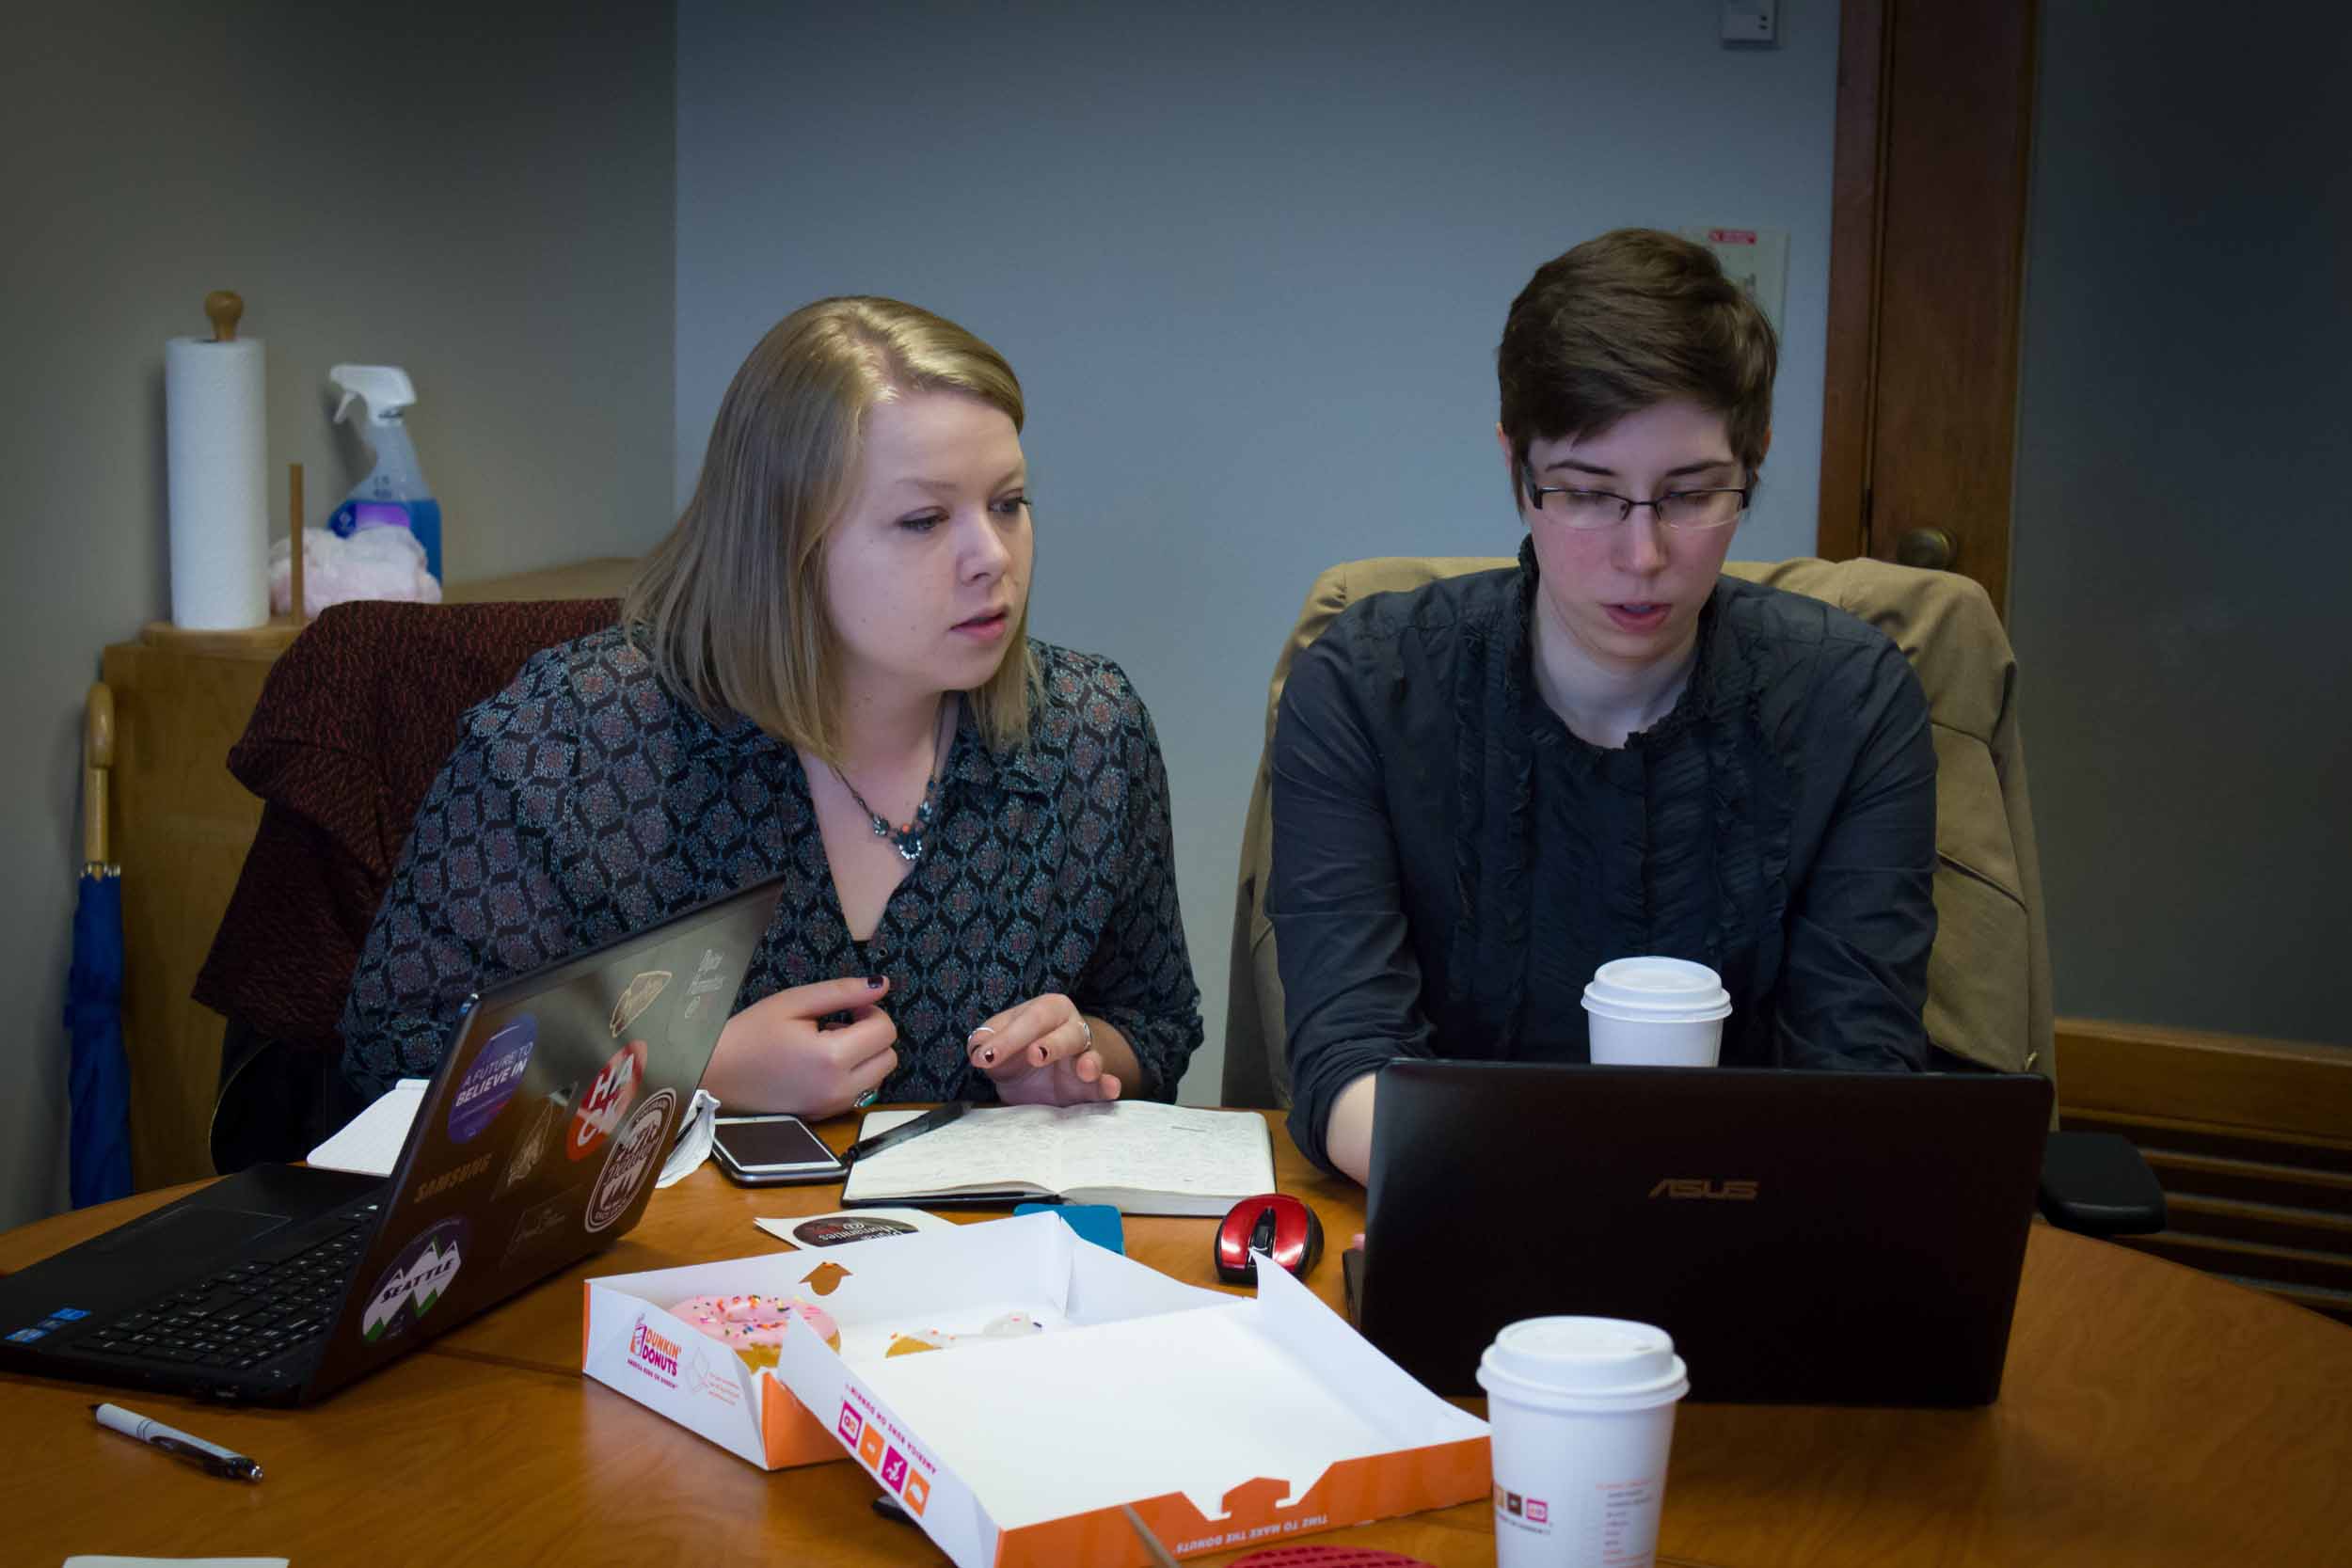 Erin Cheatham and Mary Borgo engage in site coding at the University of Nebraska-Lincoln's Love Library, 2016. Copyright Angela Aliff. Creative Commons Attribution-NonCommercial 3.0 Unported (https://creativecommons.org/licenses/by-nc/3.0/).